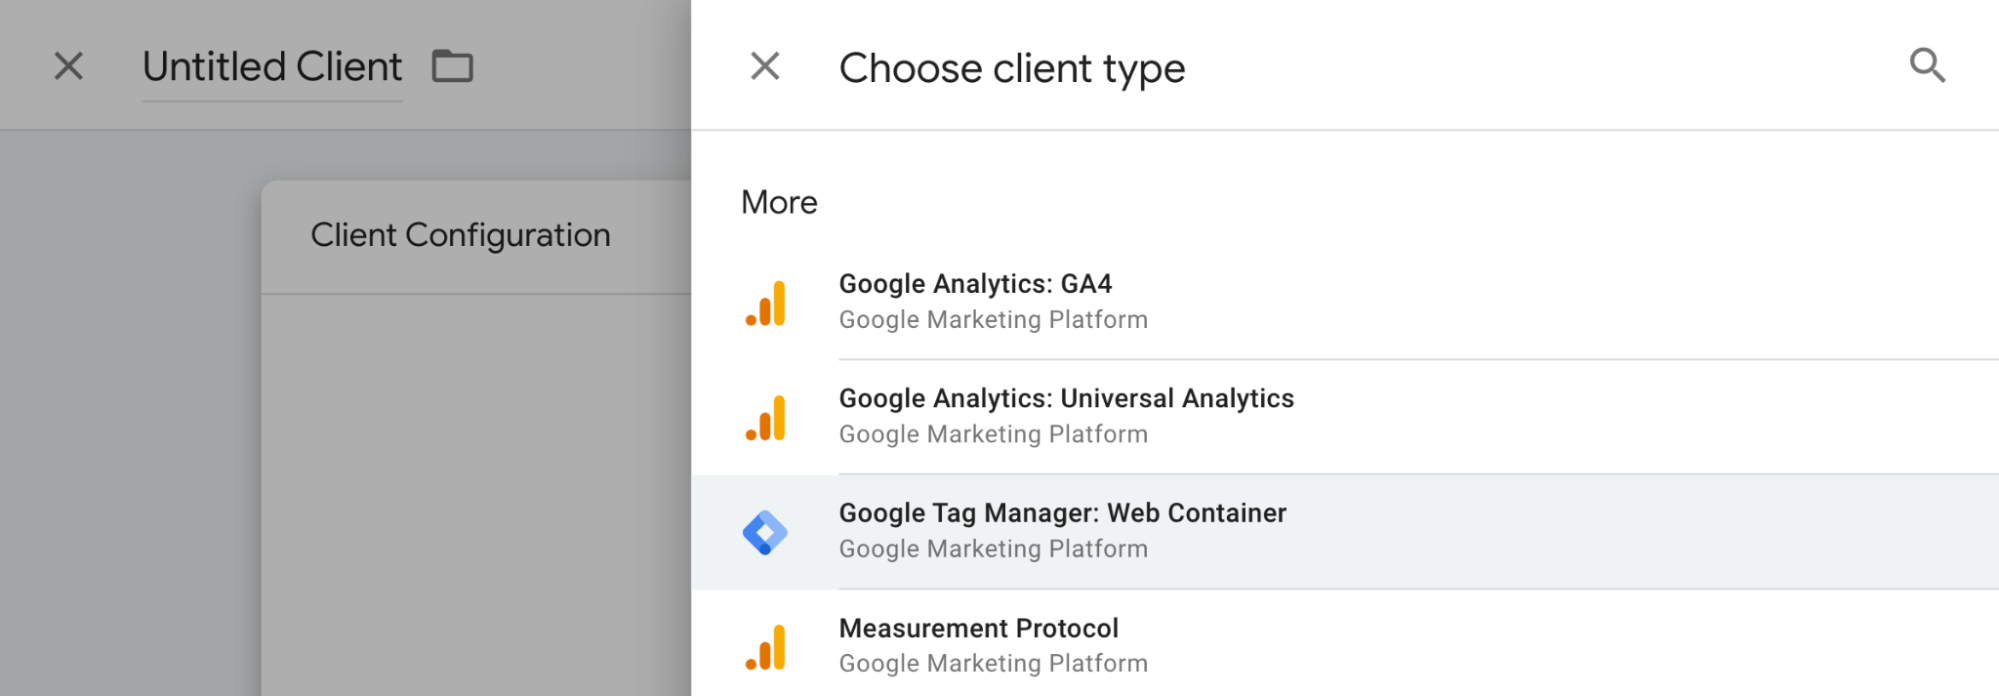 Choose client
type dialog with Tag Manager: Web Container client
highlighted